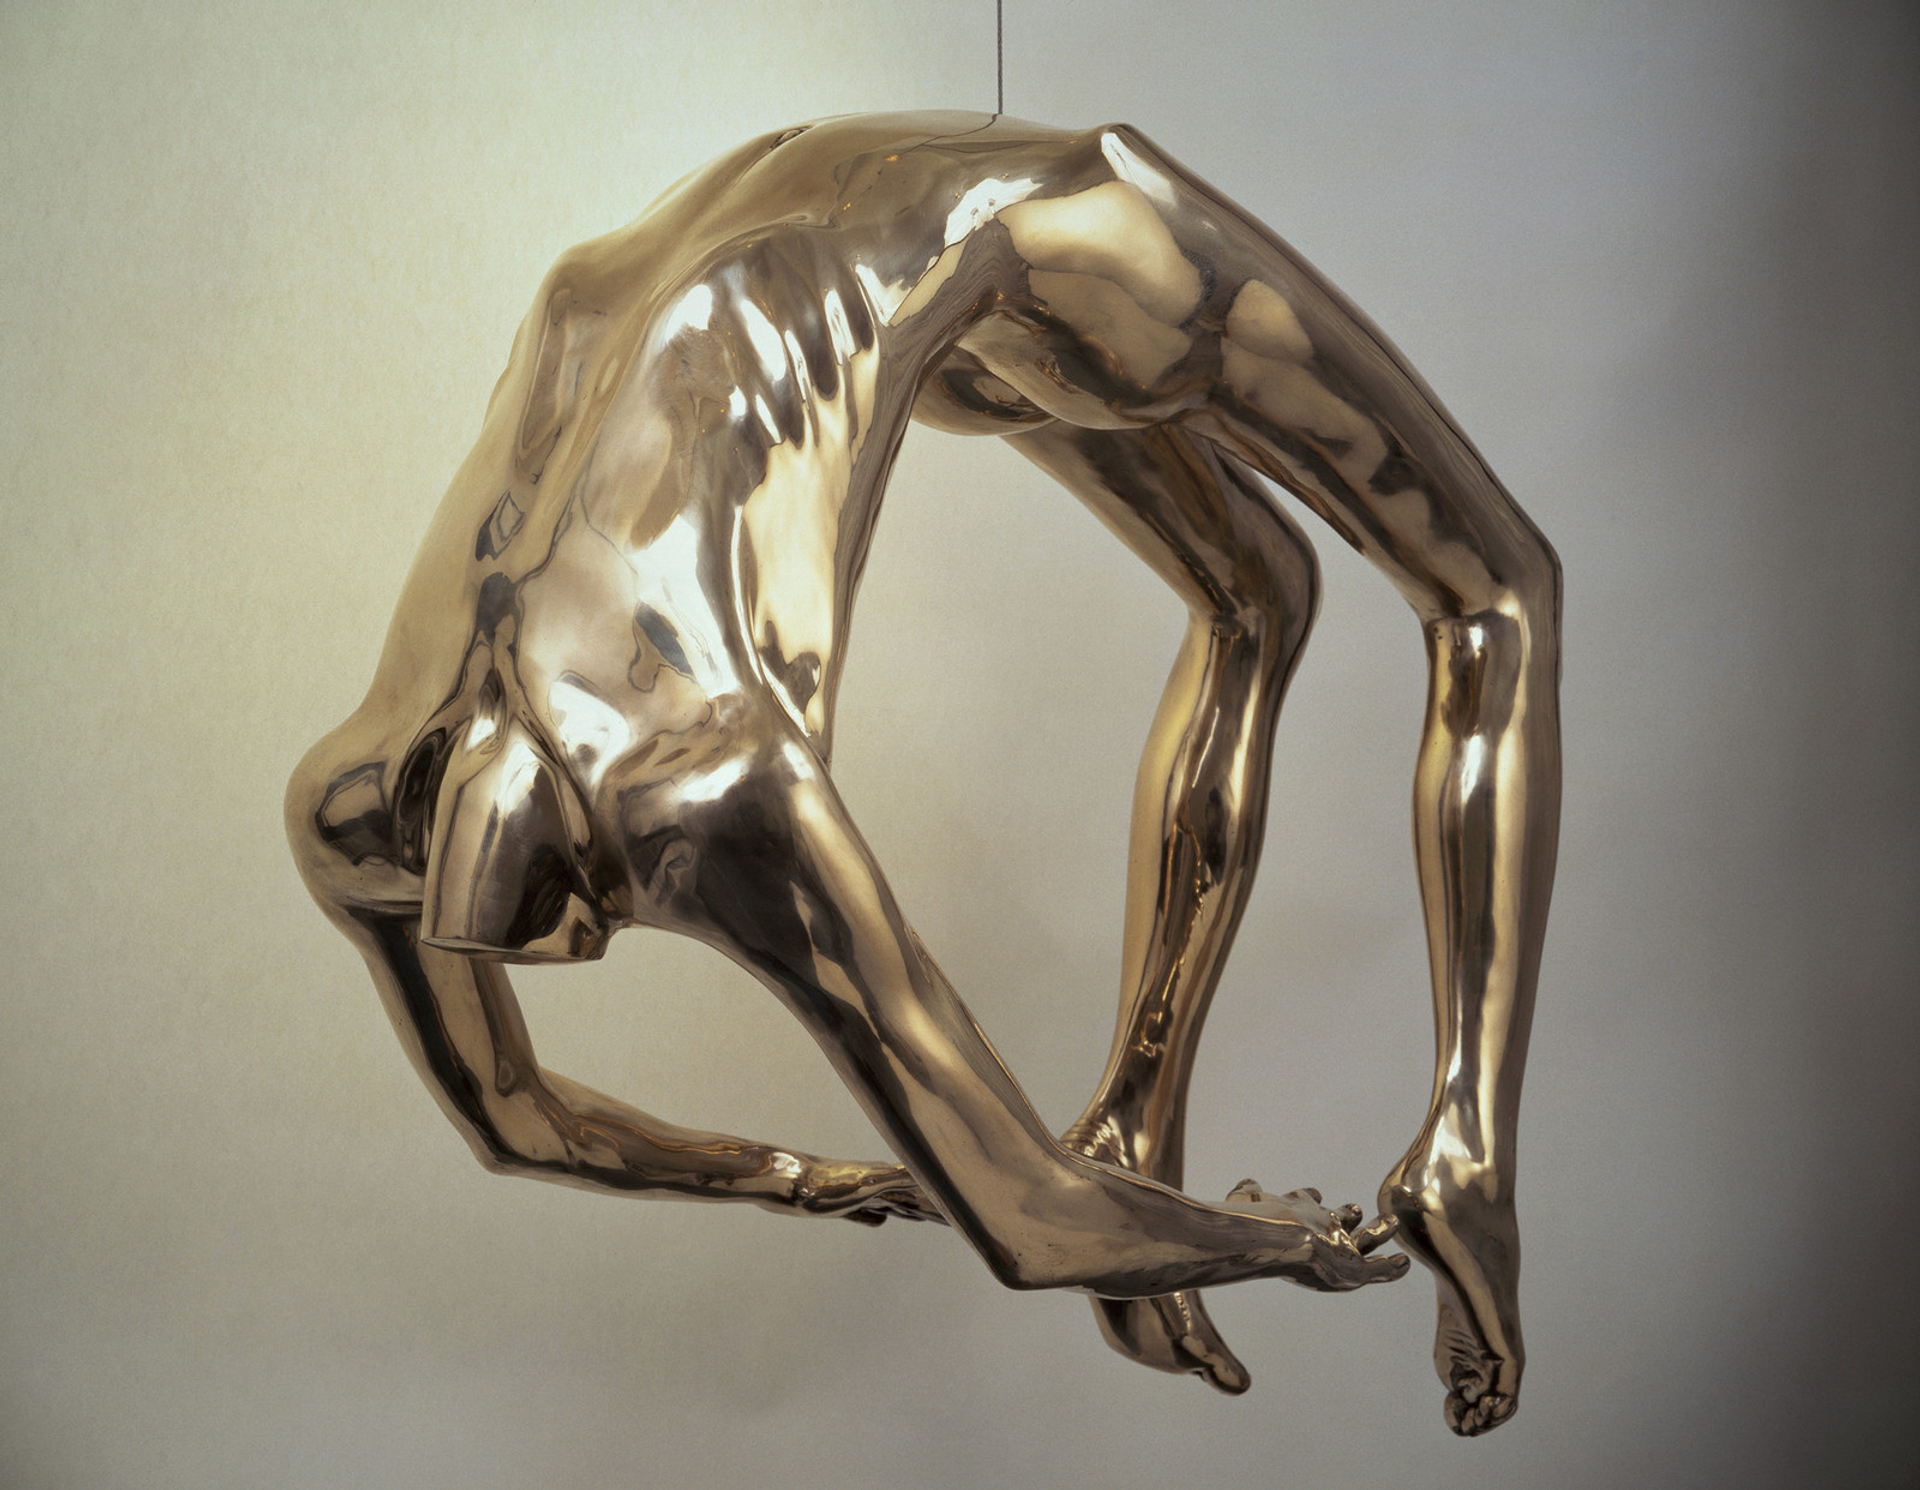 Photograph of artist Louise Bourgeois’ Arch Of Hysteria bronze statue. A headless figure that has an arch in their back from bending over backwards, touching the heels of their feet.  